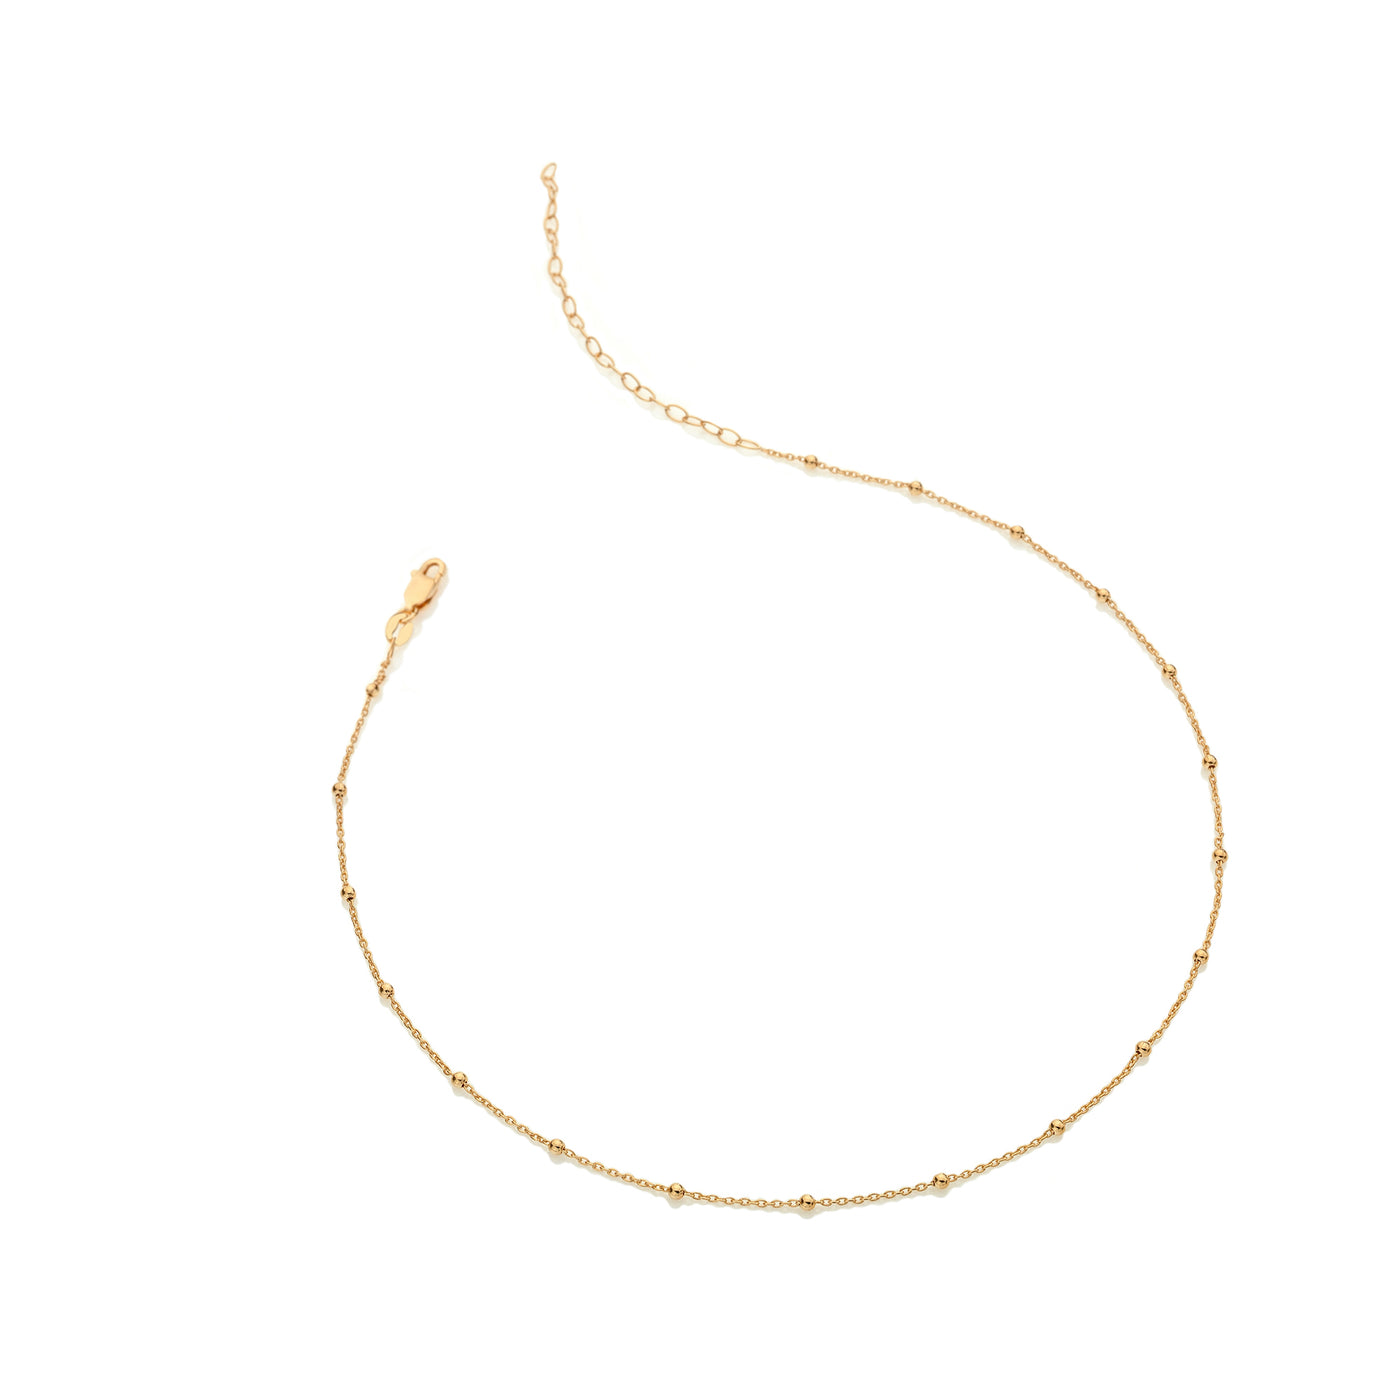 Hot Diamonds by Jac Jossa -18ct Gold Plated Sterling Silver Embrace Beaded Cable Chain